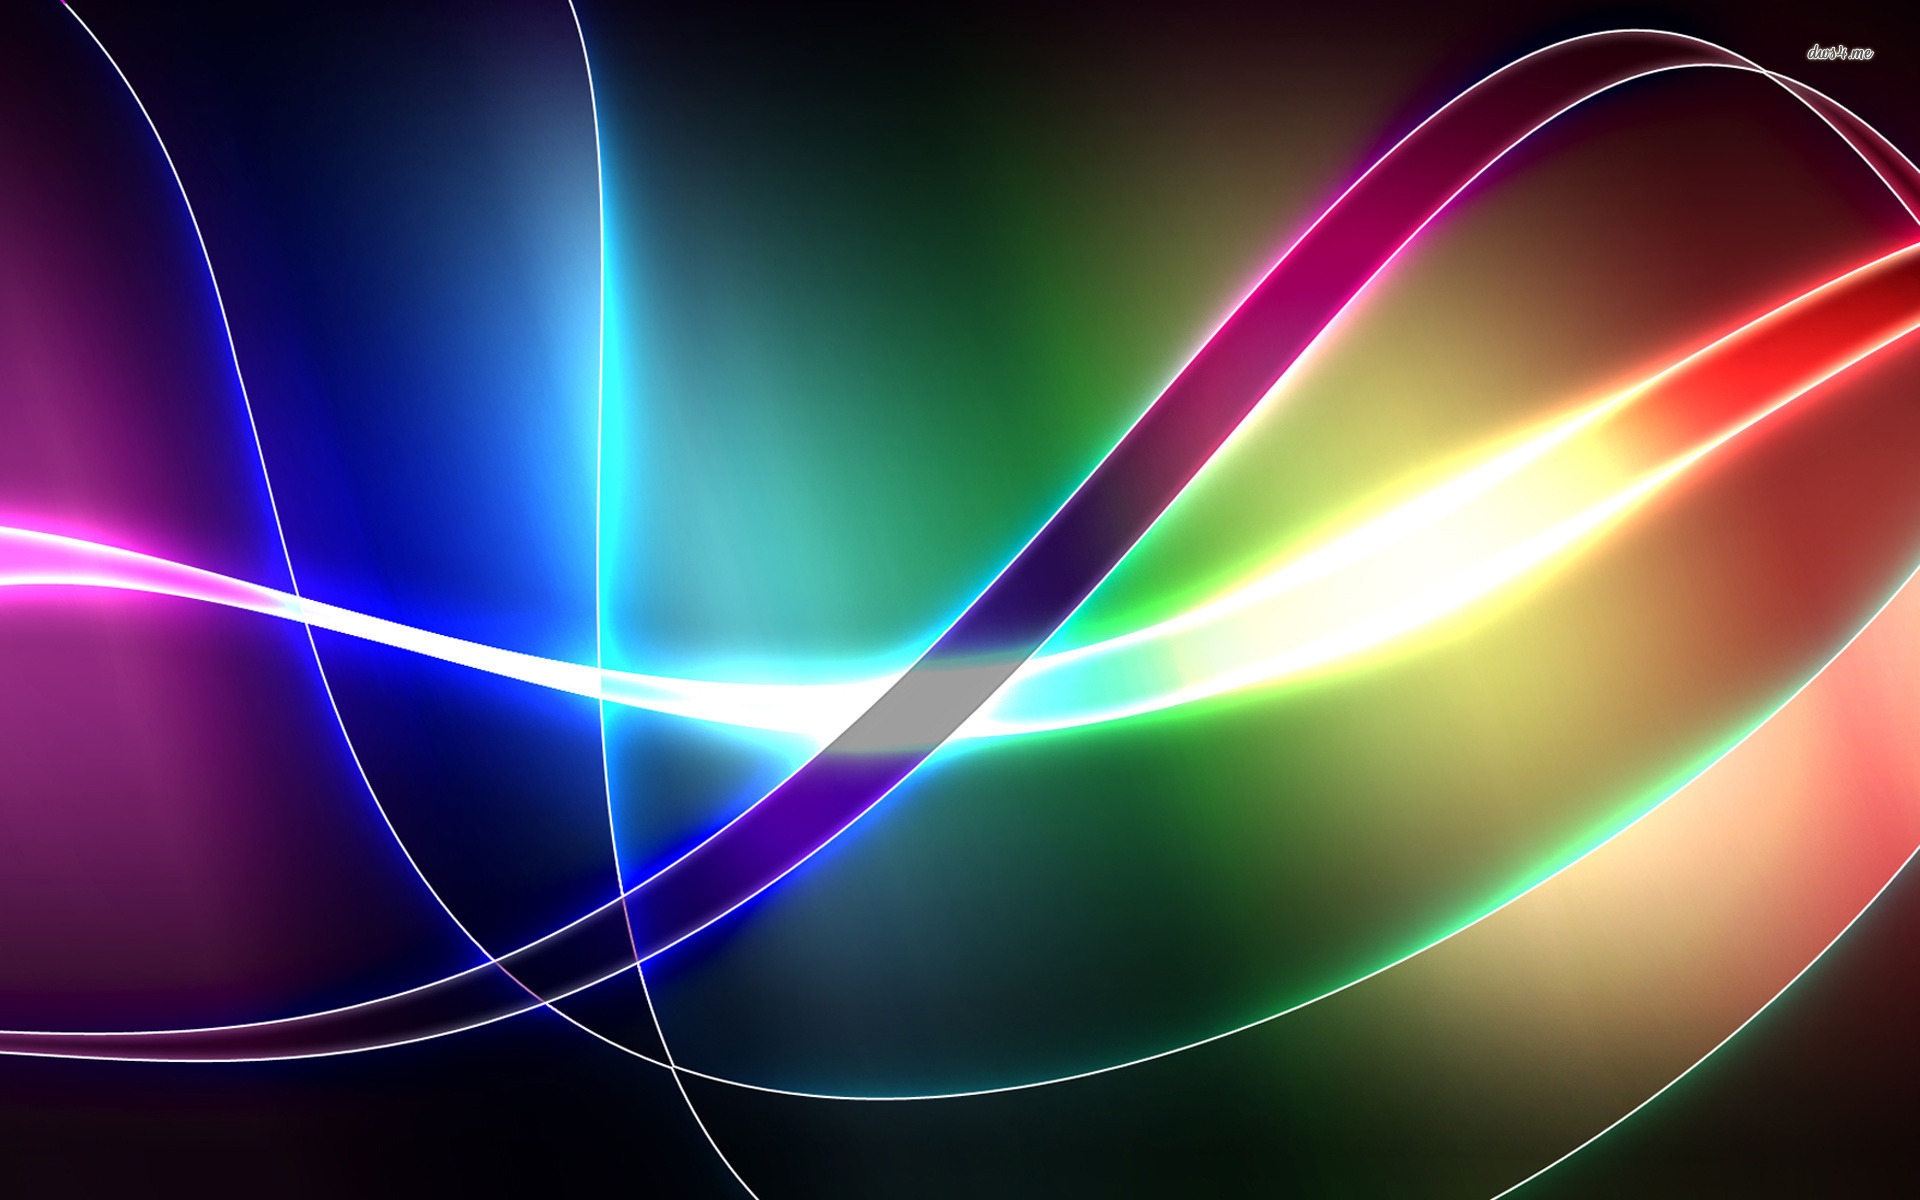 ... Colorful glowing curves wallpaper 1920x1200 ...